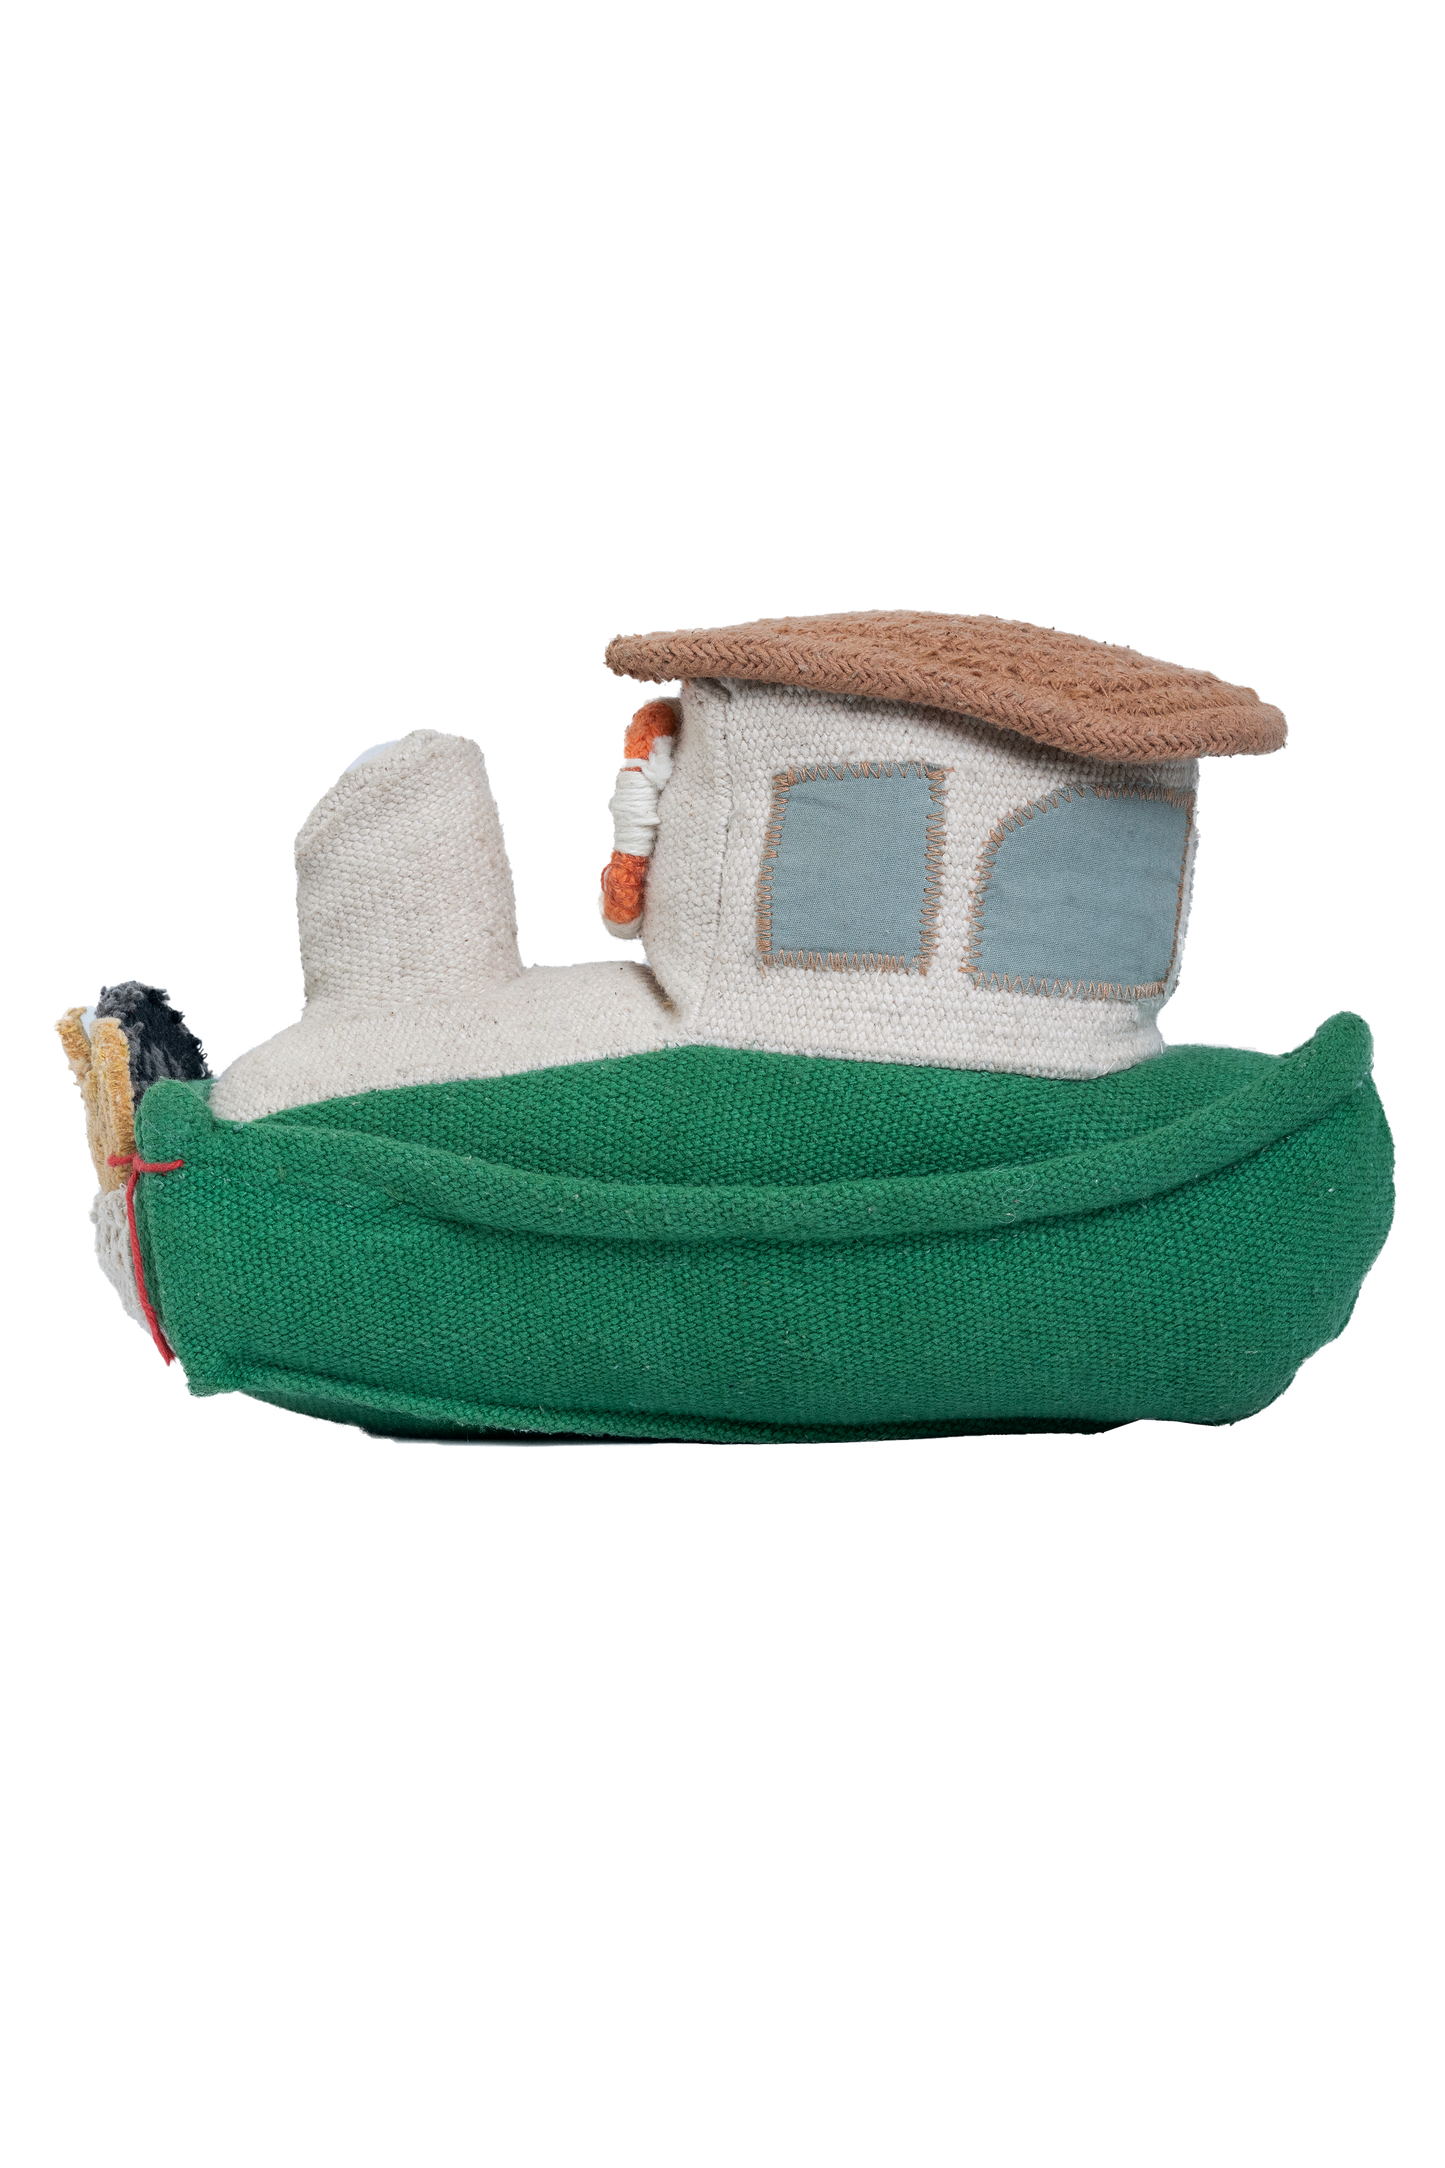 Ride & Roll play set -Boat